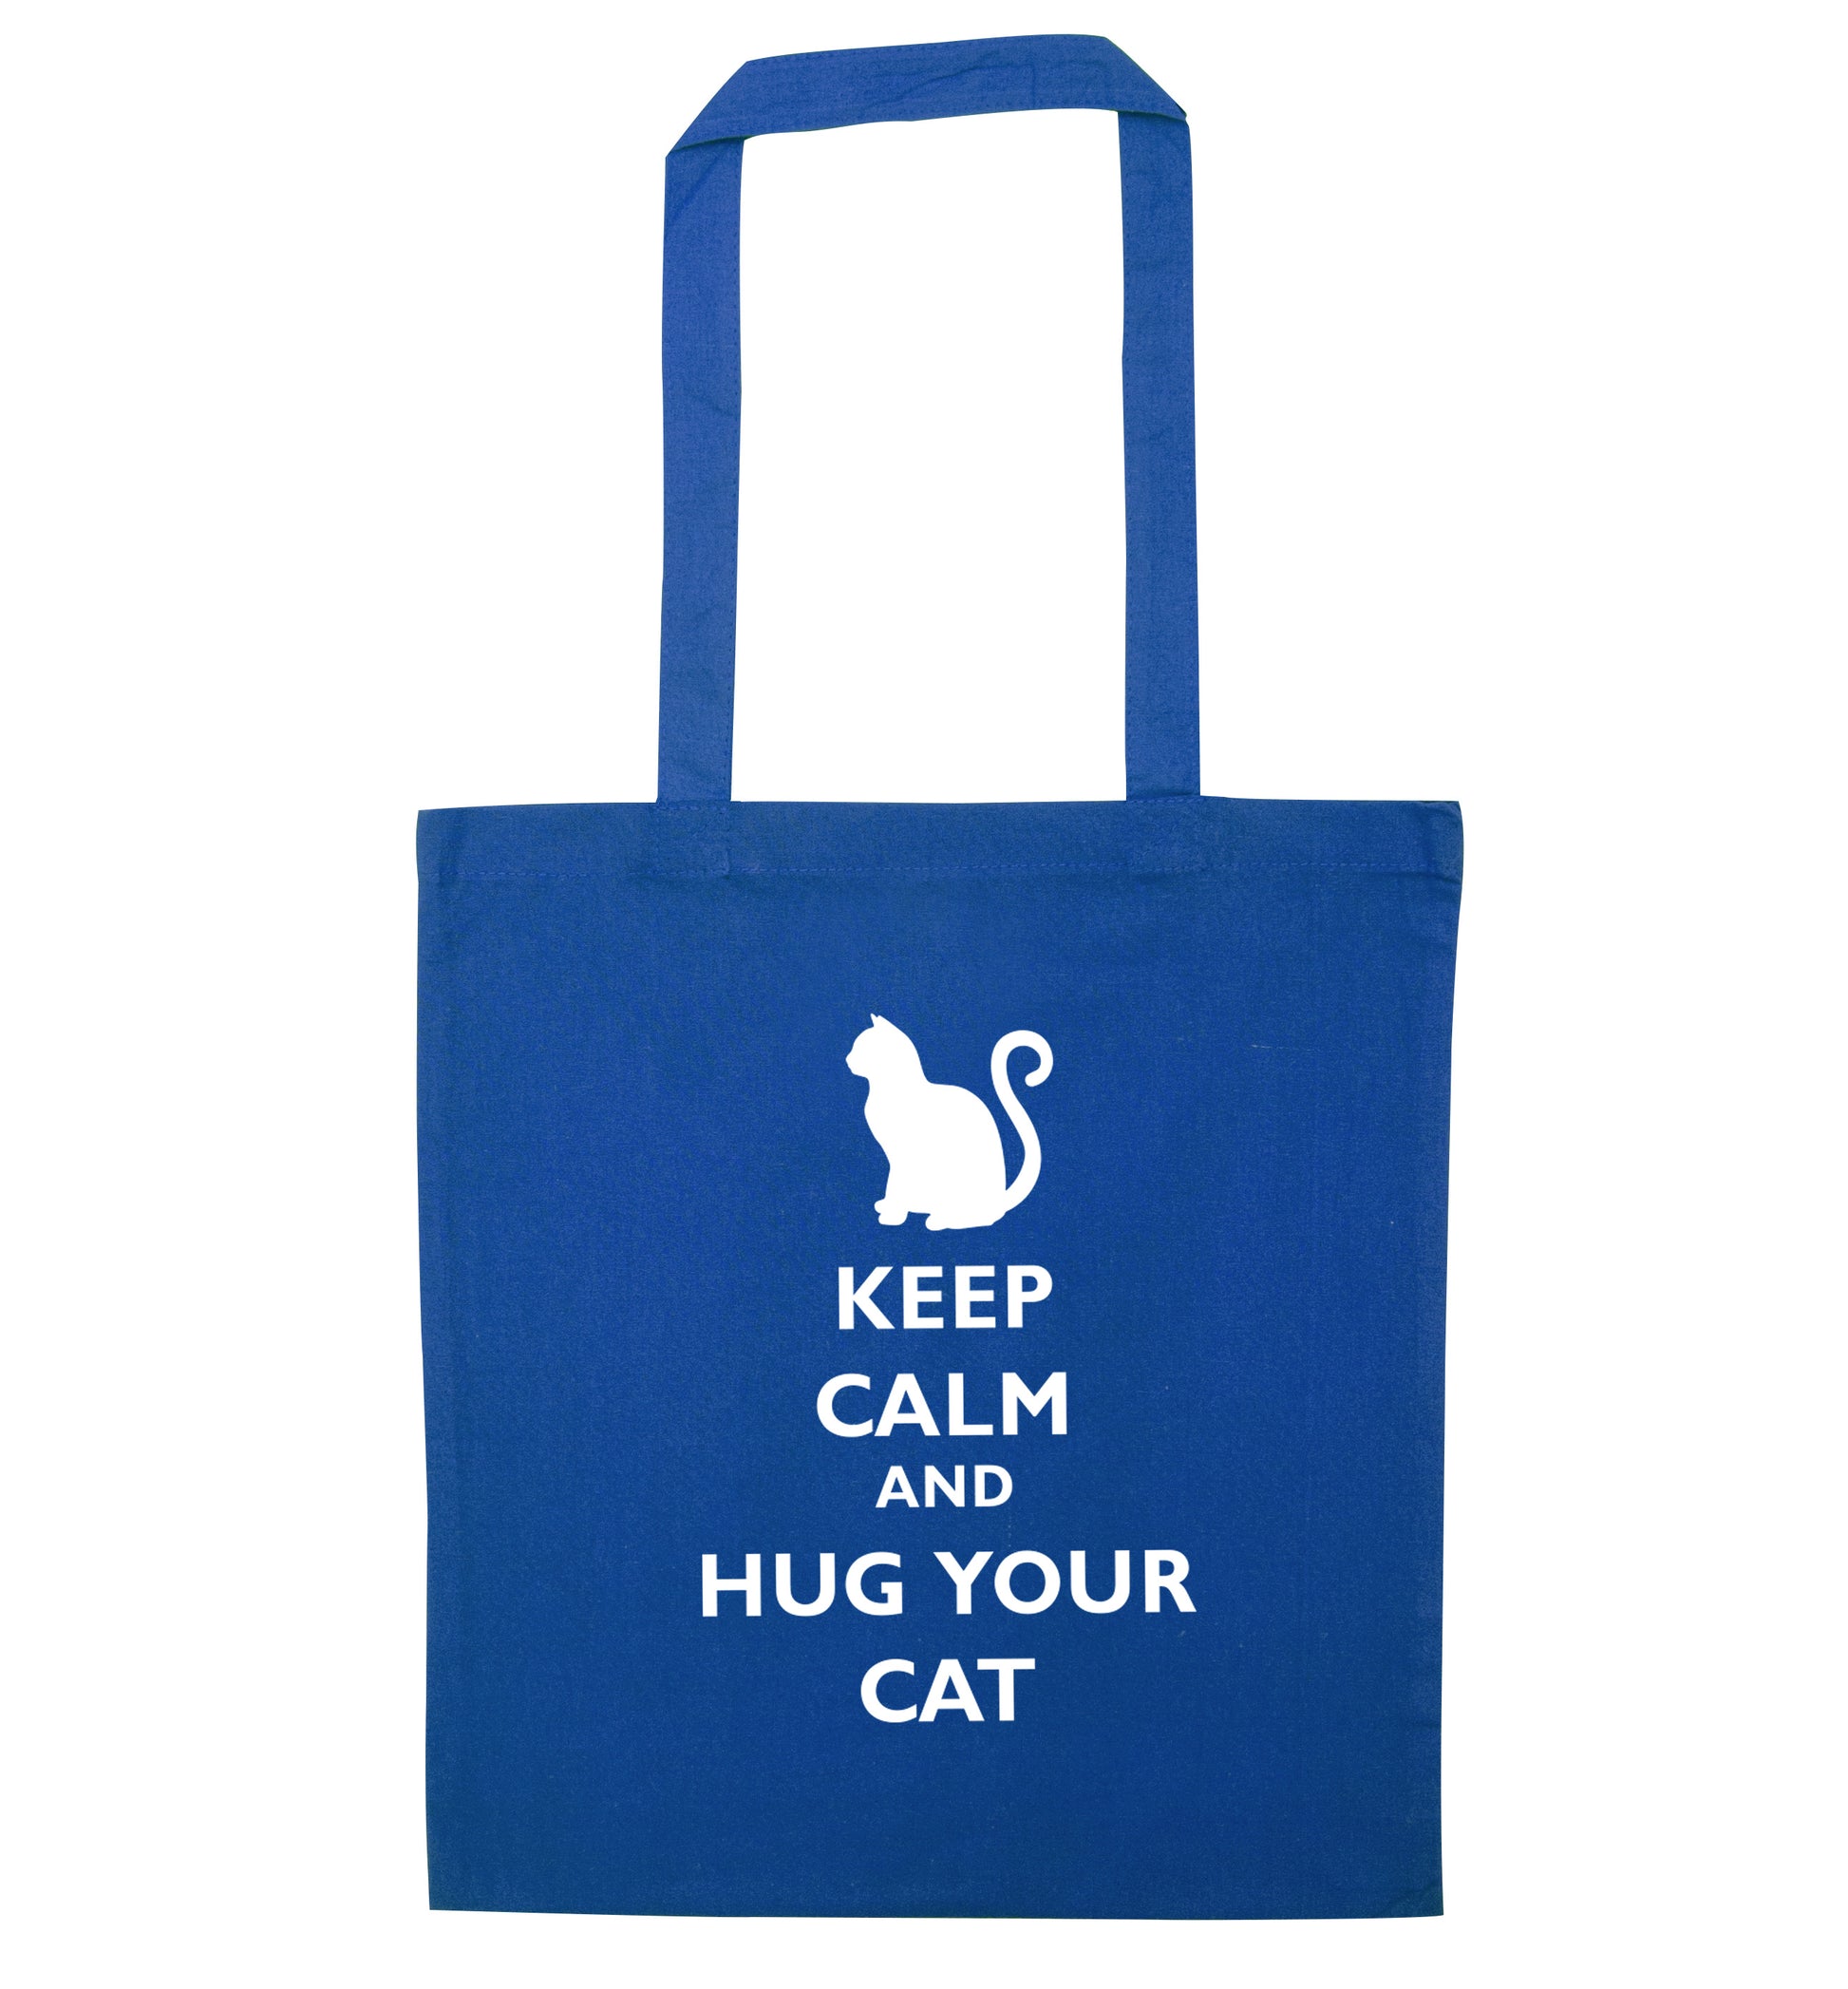 Keep calm and hug your cat blue tote bag